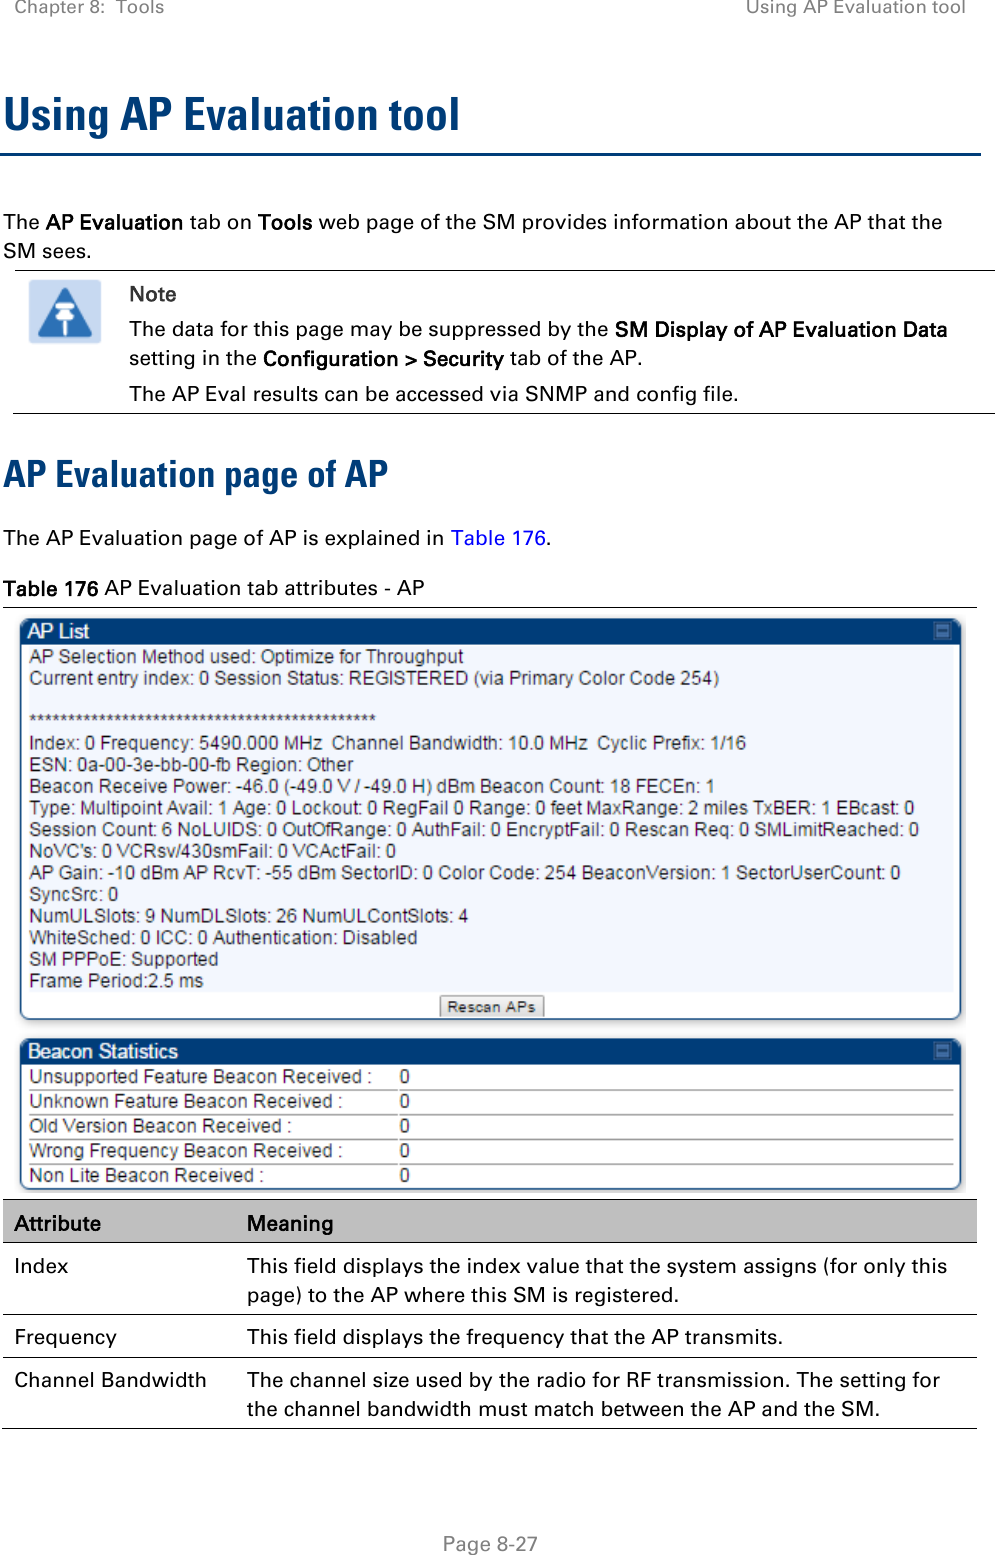 Chapter 8:  Tools Using AP Evaluation tool   Page 8-27 Using AP Evaluation tool The AP Evaluation tab on Tools web page of the SM provides information about the AP that the SM sees.   Note The data for this page may be suppressed by the SM Display of AP Evaluation Data setting in the Configuration &gt; Security tab of the AP. The AP Eval results can be accessed via SNMP and config file. AP Evaluation page of AP The AP Evaluation page of AP is explained in Table 176. Table 176 AP Evaluation tab attributes - AP  Attribute Meaning Index This field displays the index value that the system assigns (for only this page) to the AP where this SM is registered. Frequency This field displays the frequency that the AP transmits. Channel Bandwidth The channel size used by the radio for RF transmission. The setting for the channel bandwidth must match between the AP and the SM.  